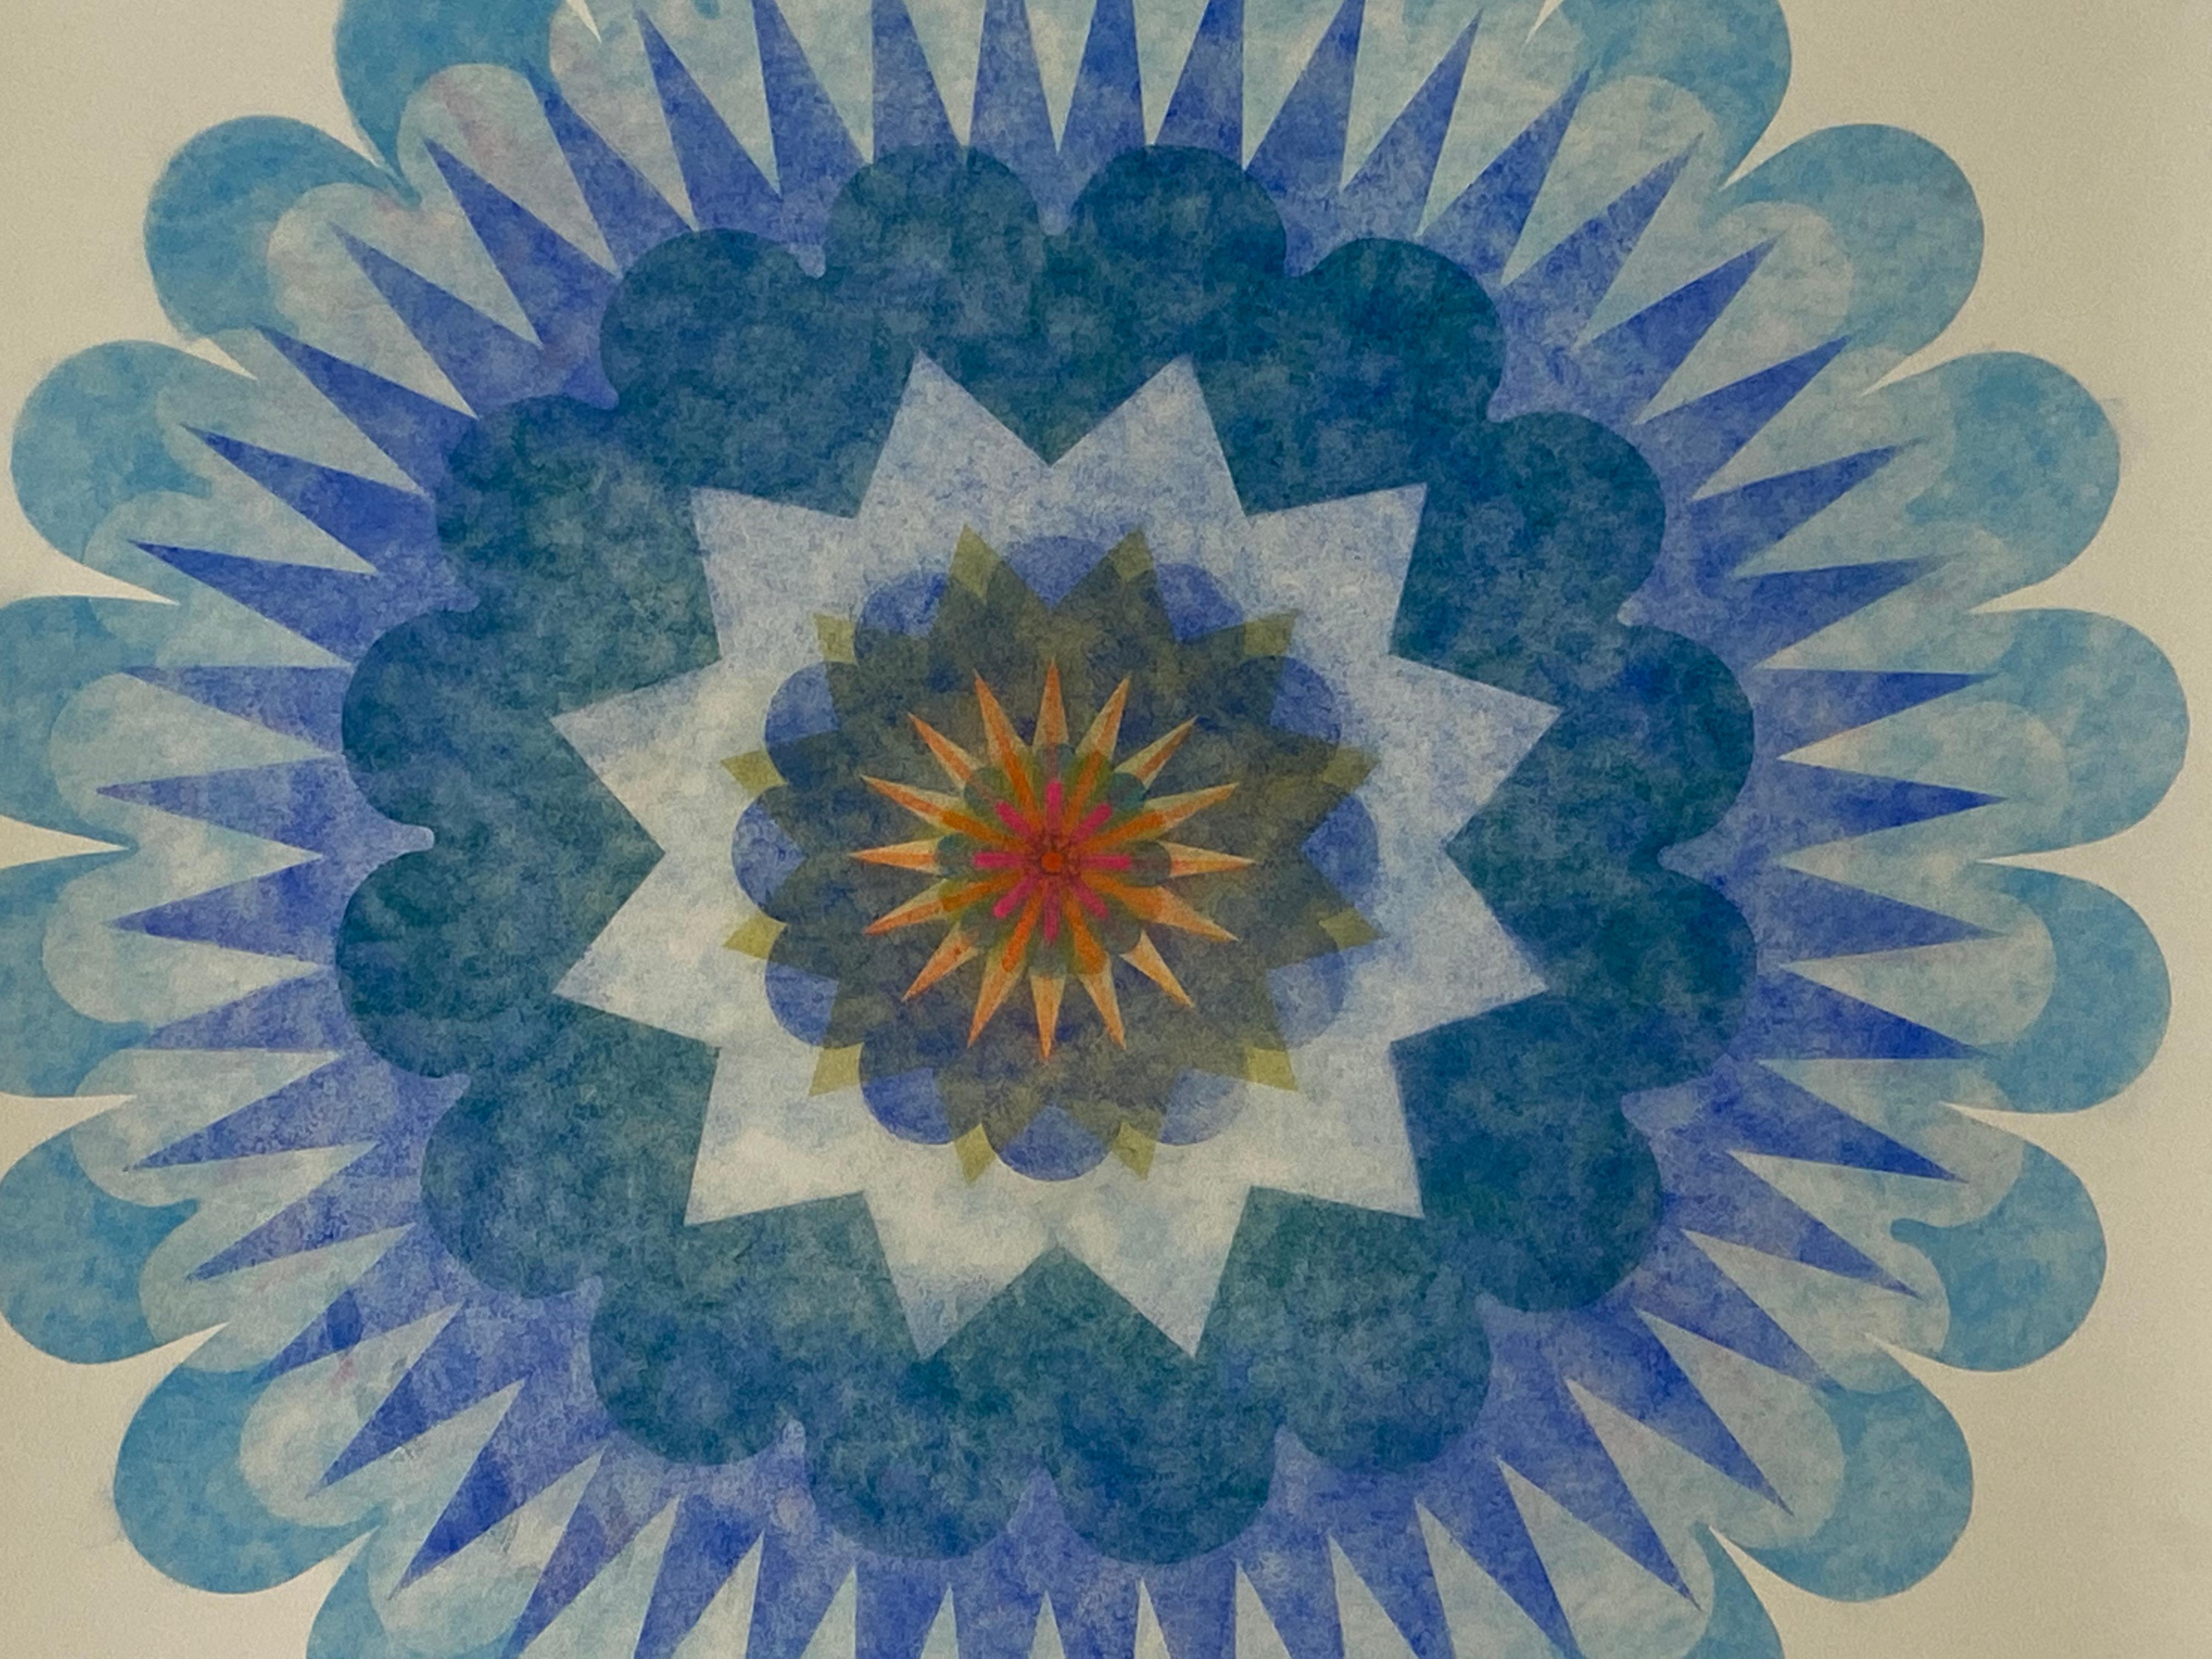 This multicolored drawing has a beautiful, soft mottled texture created with Judge's unique powered pigment technique. Poptic 25 is a mandala shape predominately in shades of blue from sky blue to navy with bright red, orange and yellow at the